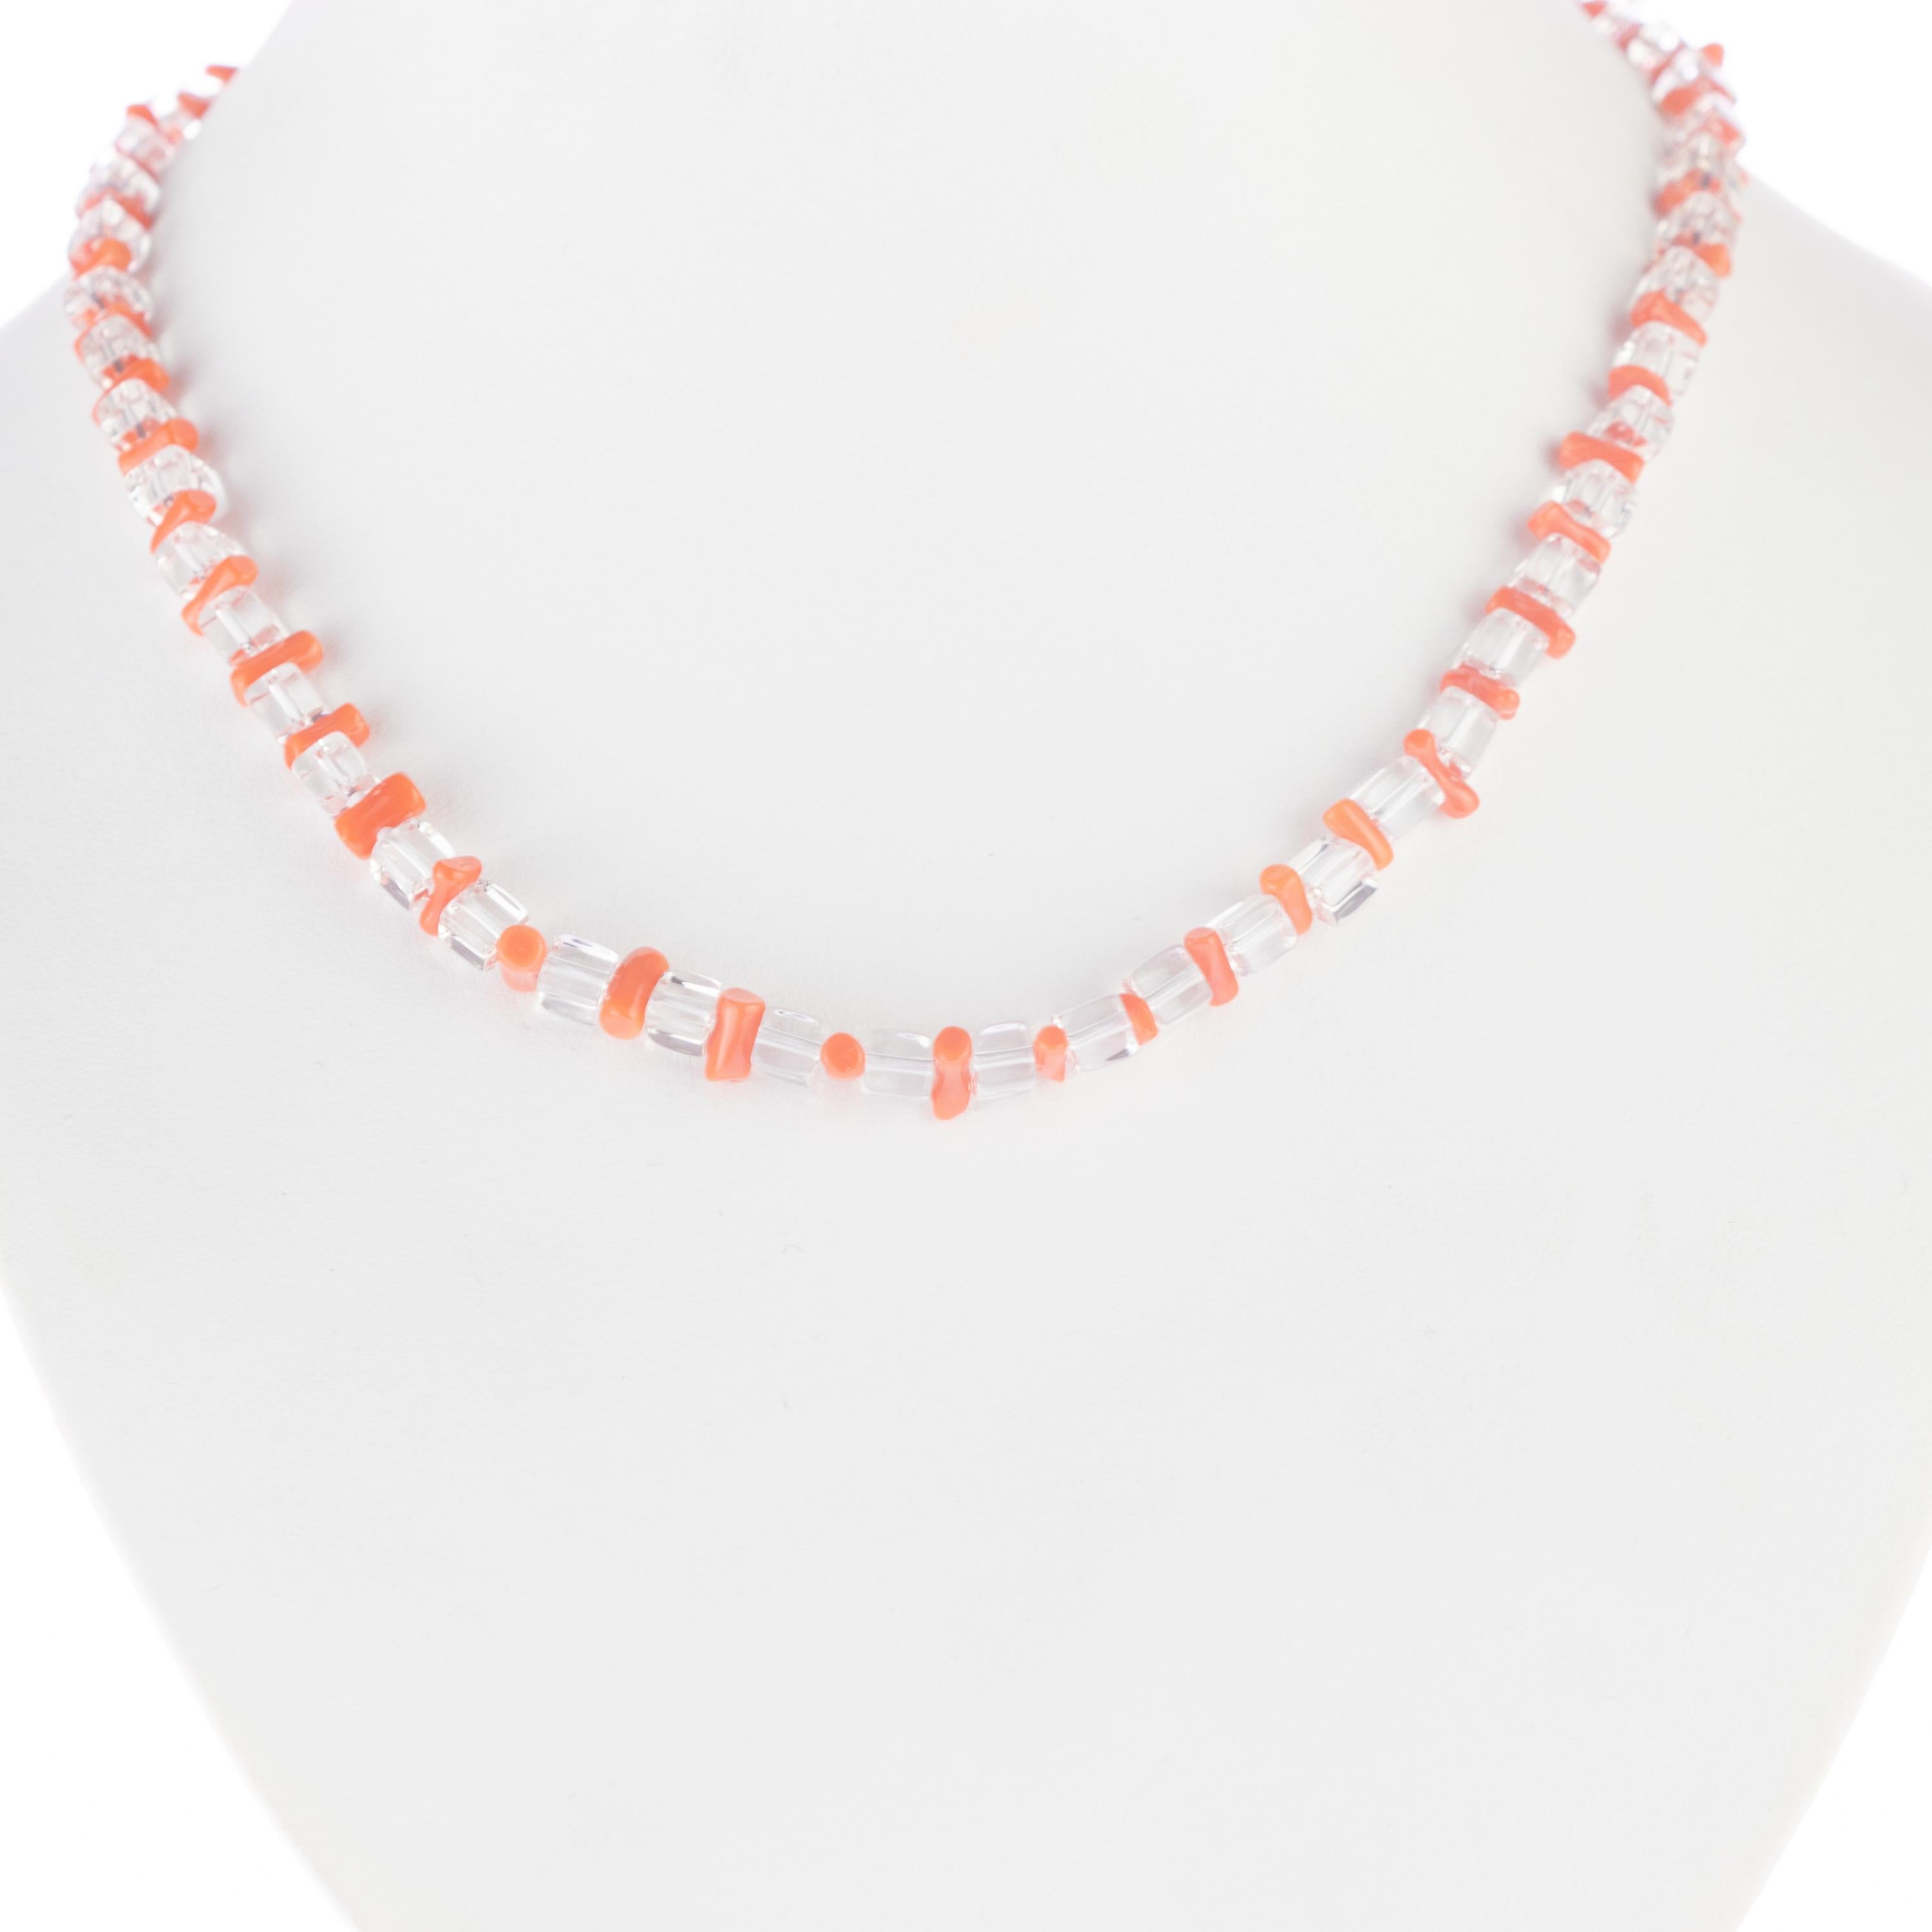 A fantastic necklace to brighten up your summer outfits. Composed with materials that shine with their own light.

Handmade with ethical precious stones, this modern design is made with red coral and rock crystal.

At Intini Jewels we are committed